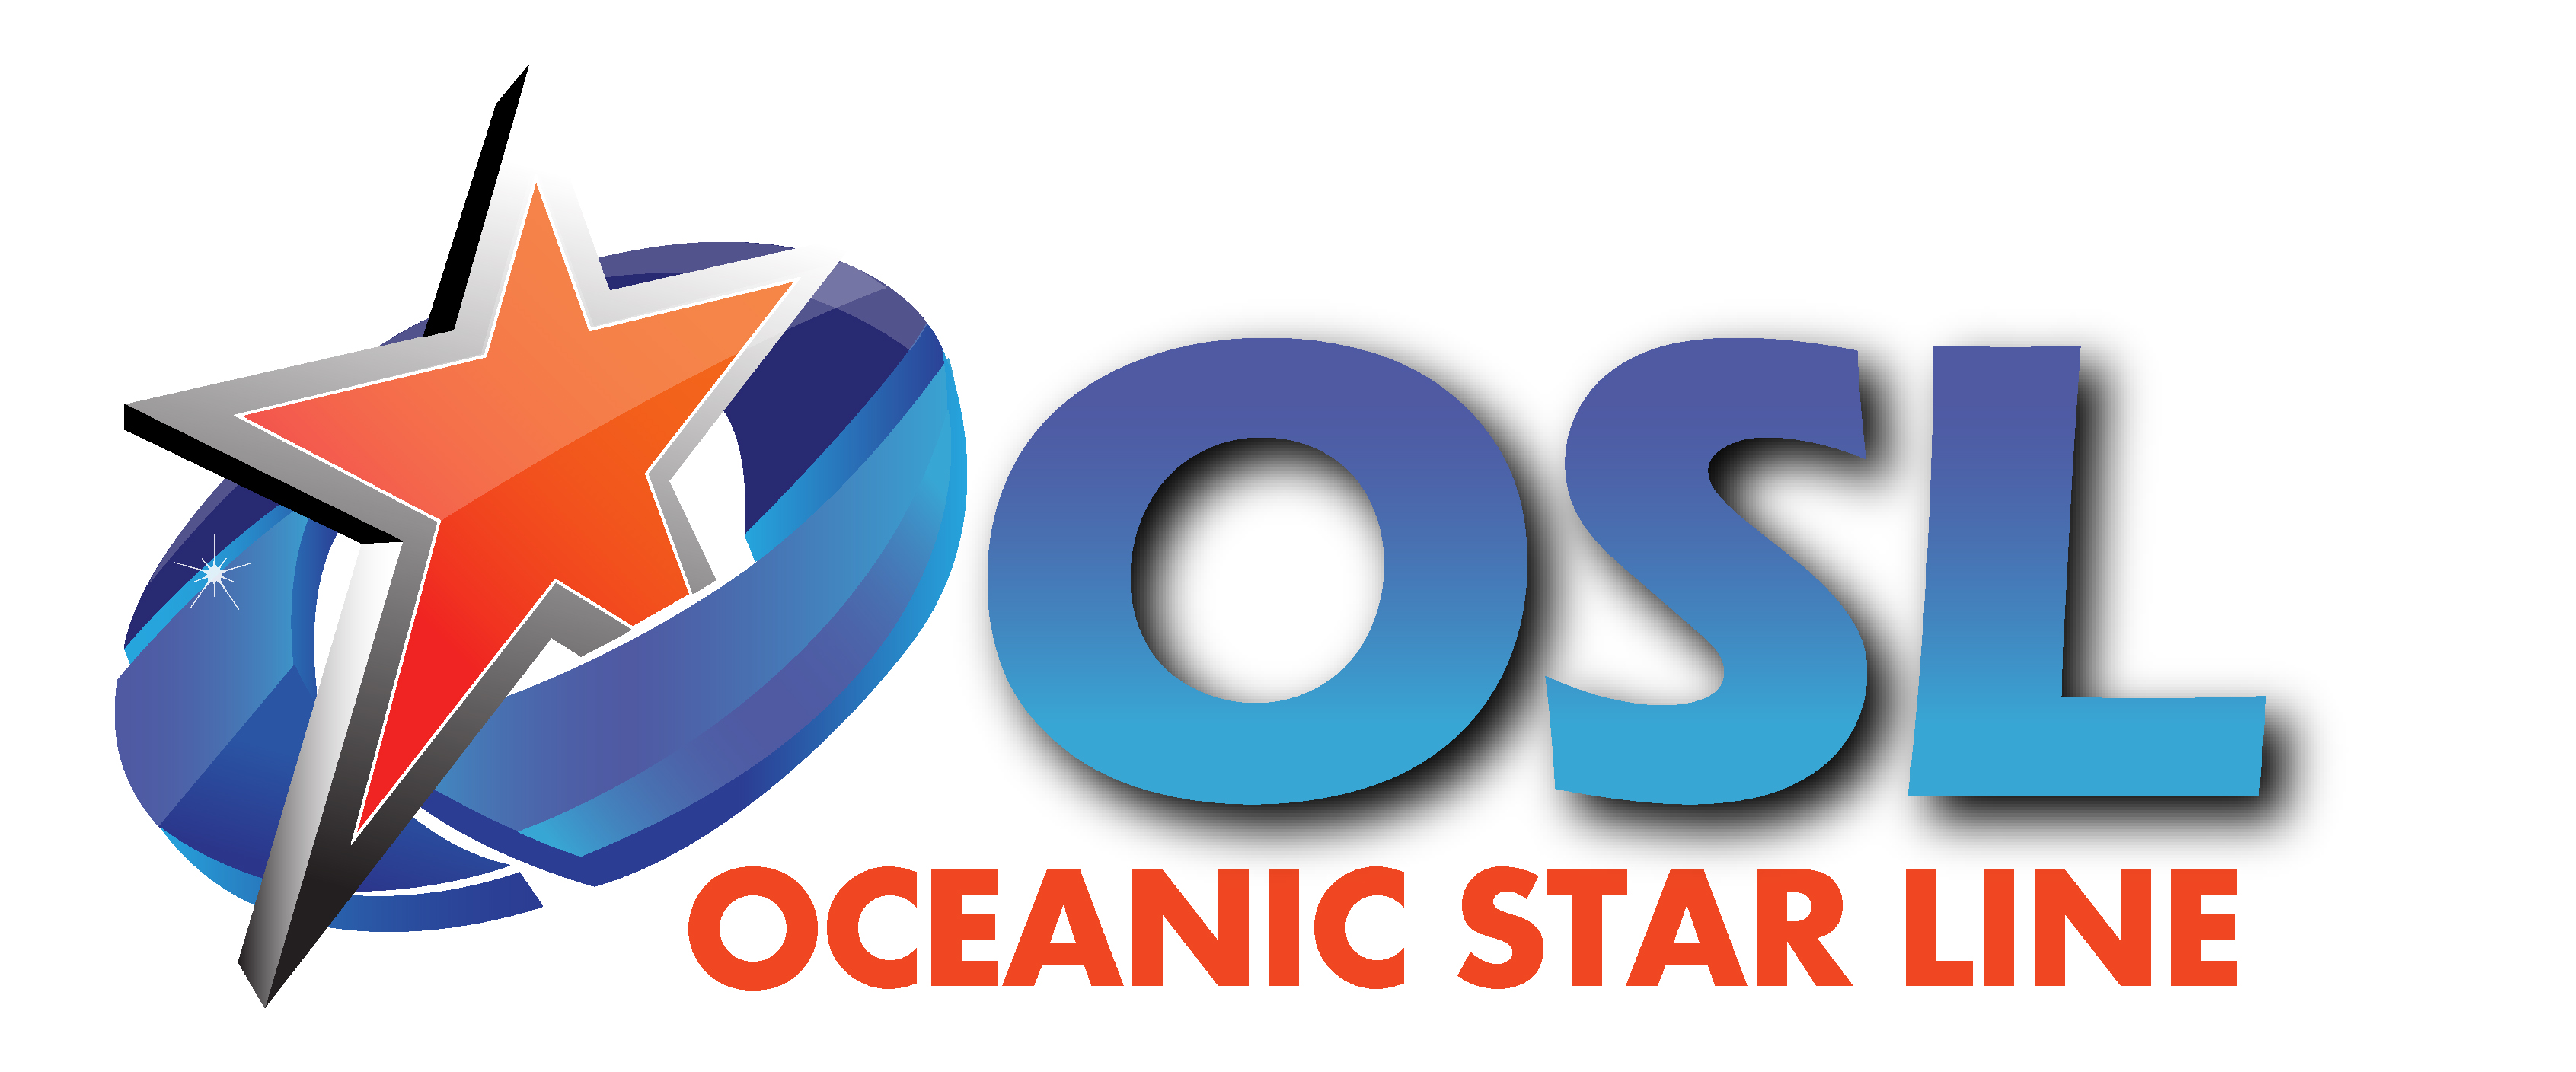 https://www.pakpositions.com/company/oceanic-star-line